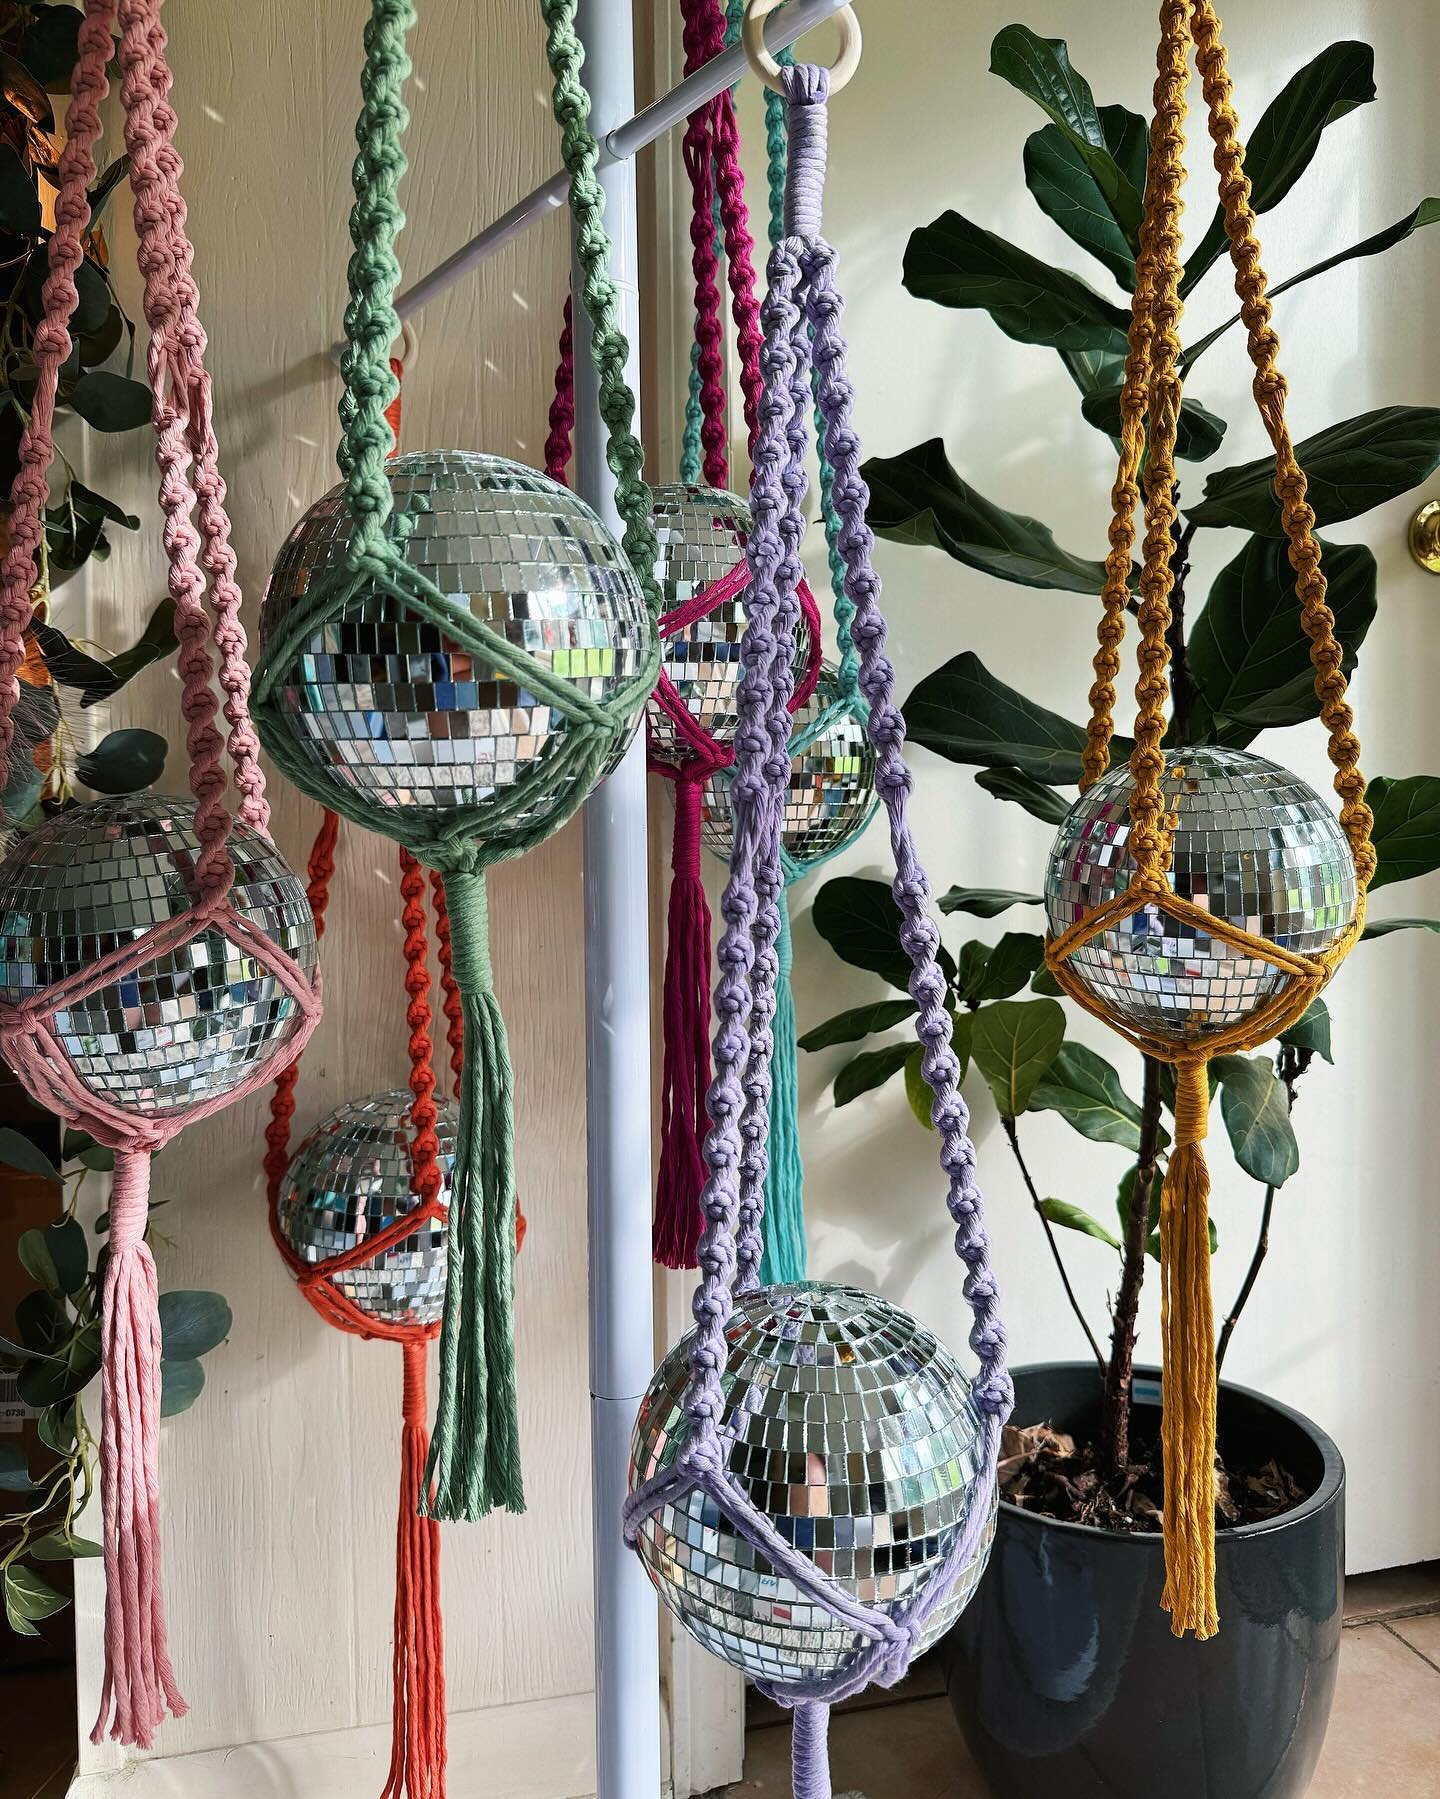 🪩✨Maker&rsquo;s Faire✨🪩

We are just 2️⃣ days away from the Mill Spring Maker&rsquo;s Faire! I was thankfully able to snag some more disco balls for my market-favorite Mirror Ball Hangers, so you can be sure to find these fun fellas at my booth in 